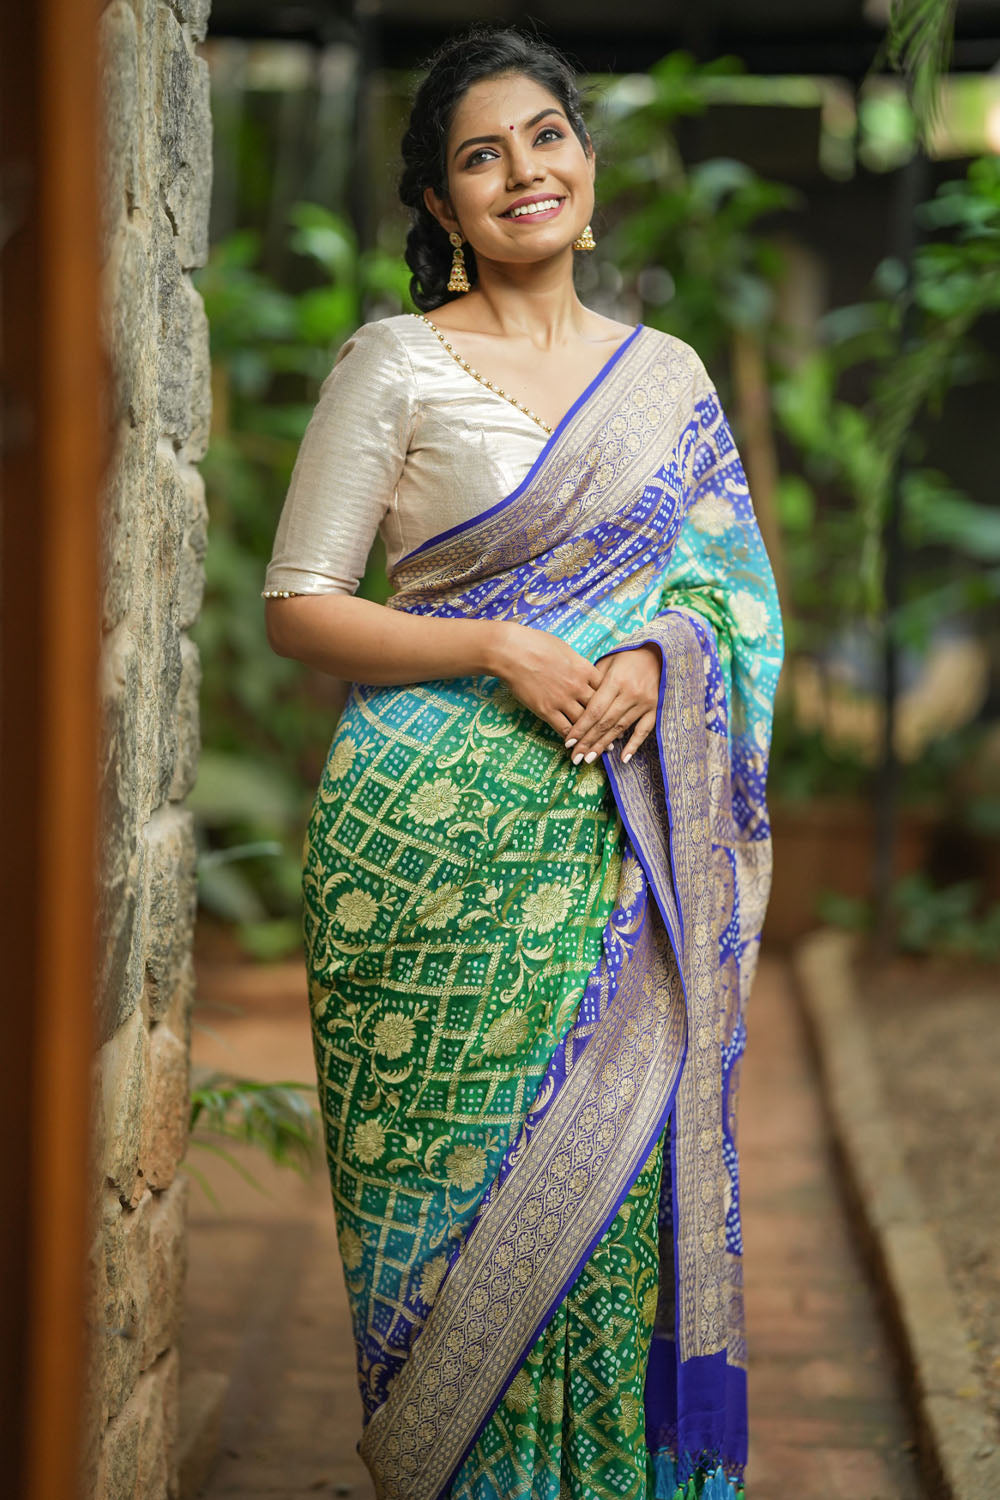 Authentic Hand Bandhej Banarasi Silk Georgette Saree in Green,Teal & Blue with Ombre jaal pattern| SILK MARK CERTIFIED